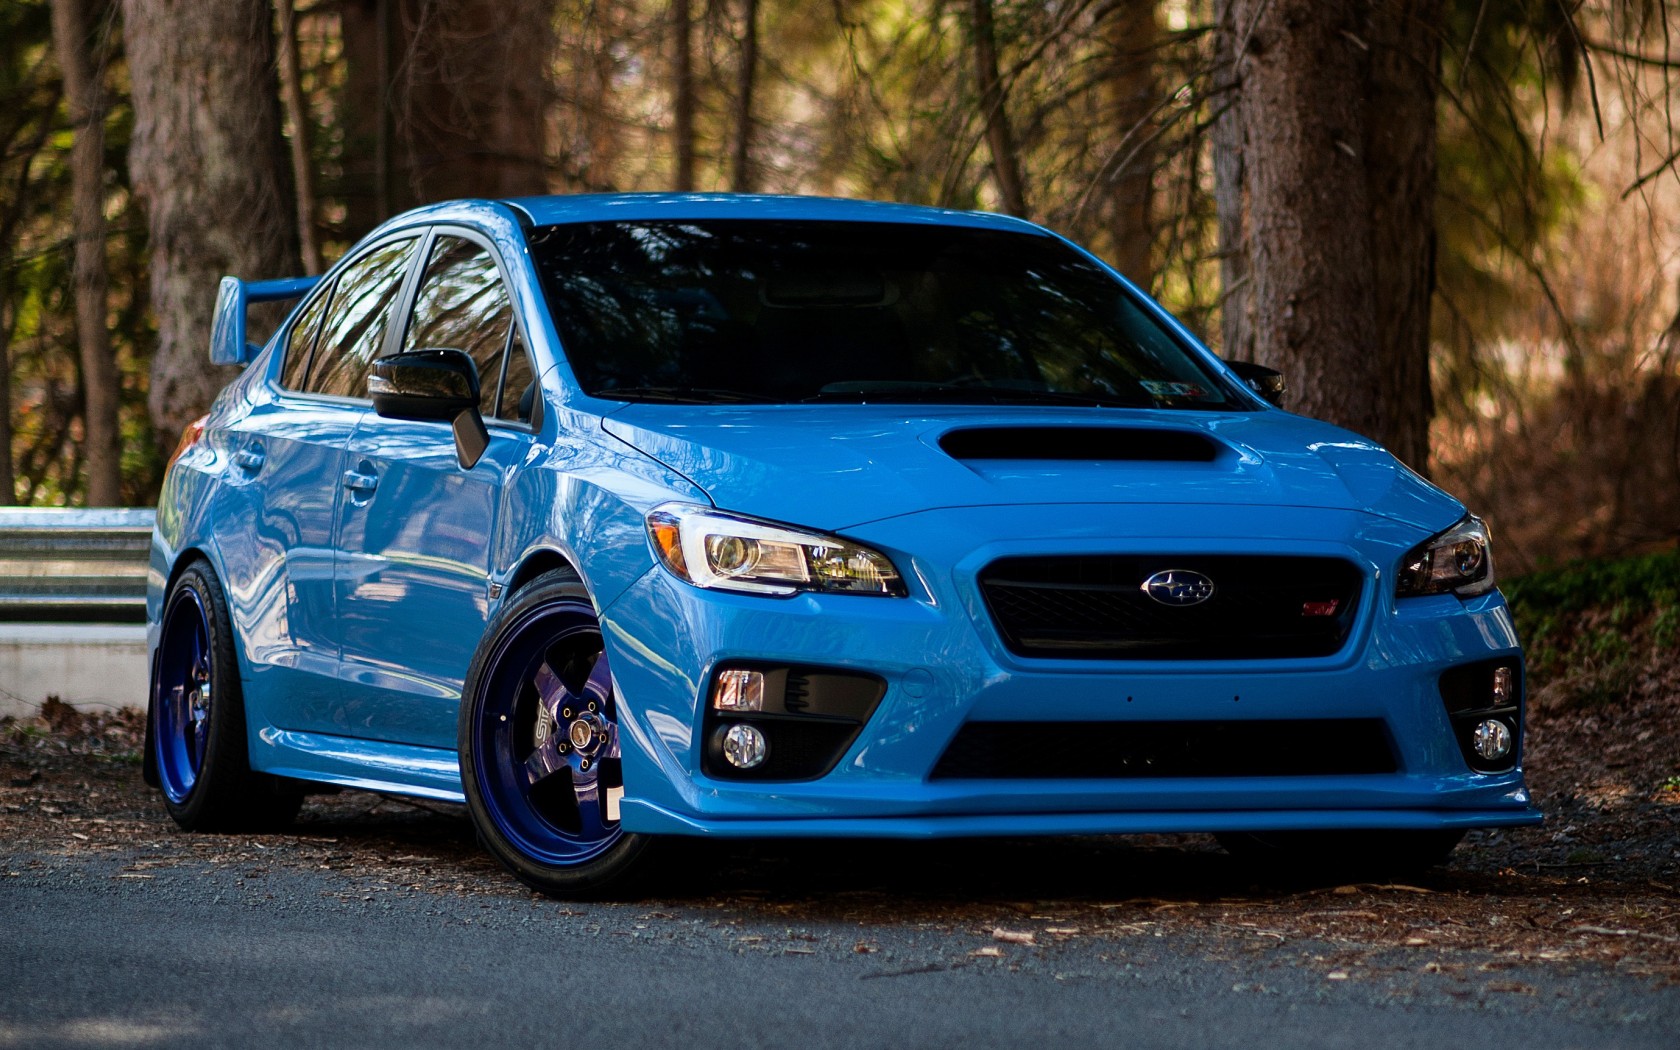 Subaru Wrx Sti Wallpaper Hd Cars 4k Wallpapers Images Photos And Background Wallpapers Den